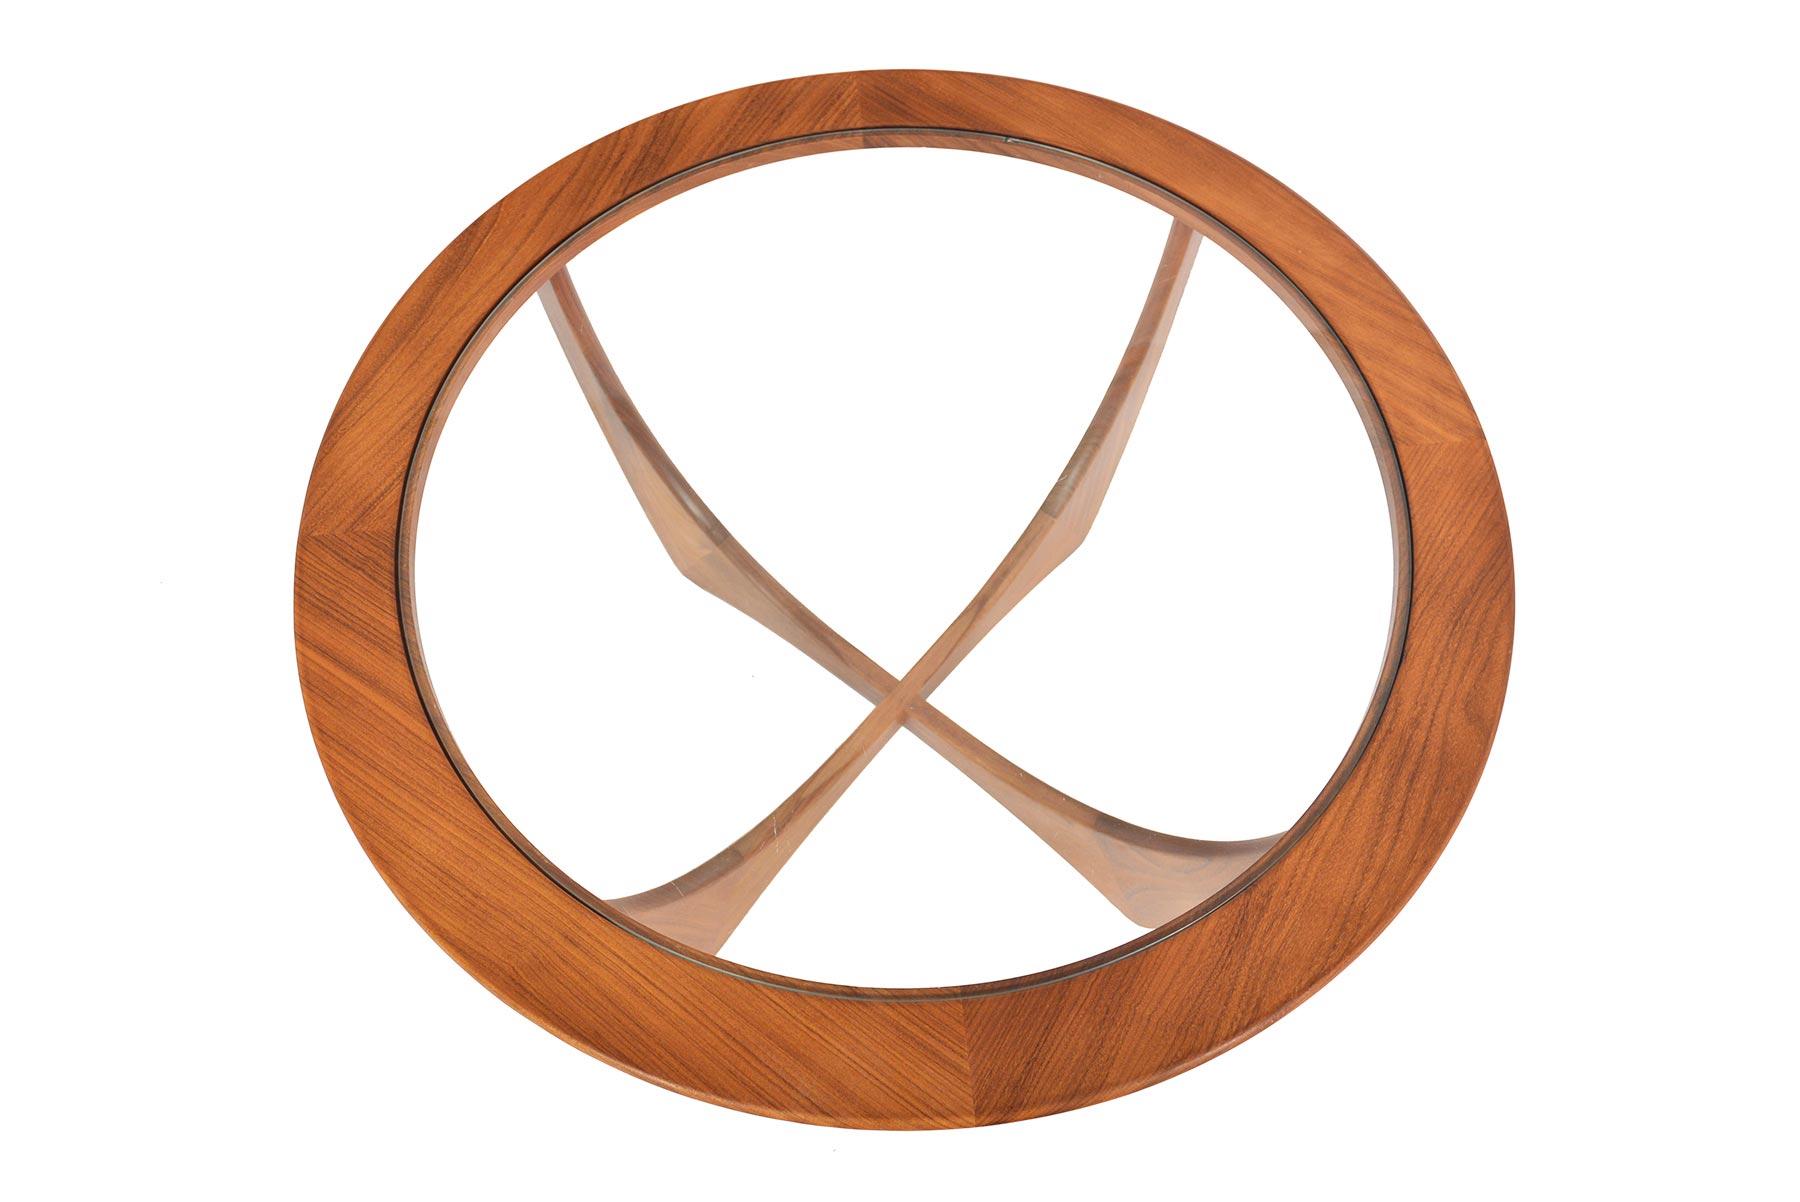 This iconic English Mid-Century Modern round teak afromosia and glass coffee table was designed by Victor Wilkins for G Plan’s Astro range in the 1960s. A round plate of glass is supported by beautifully sculpted banding and stands on parabolic